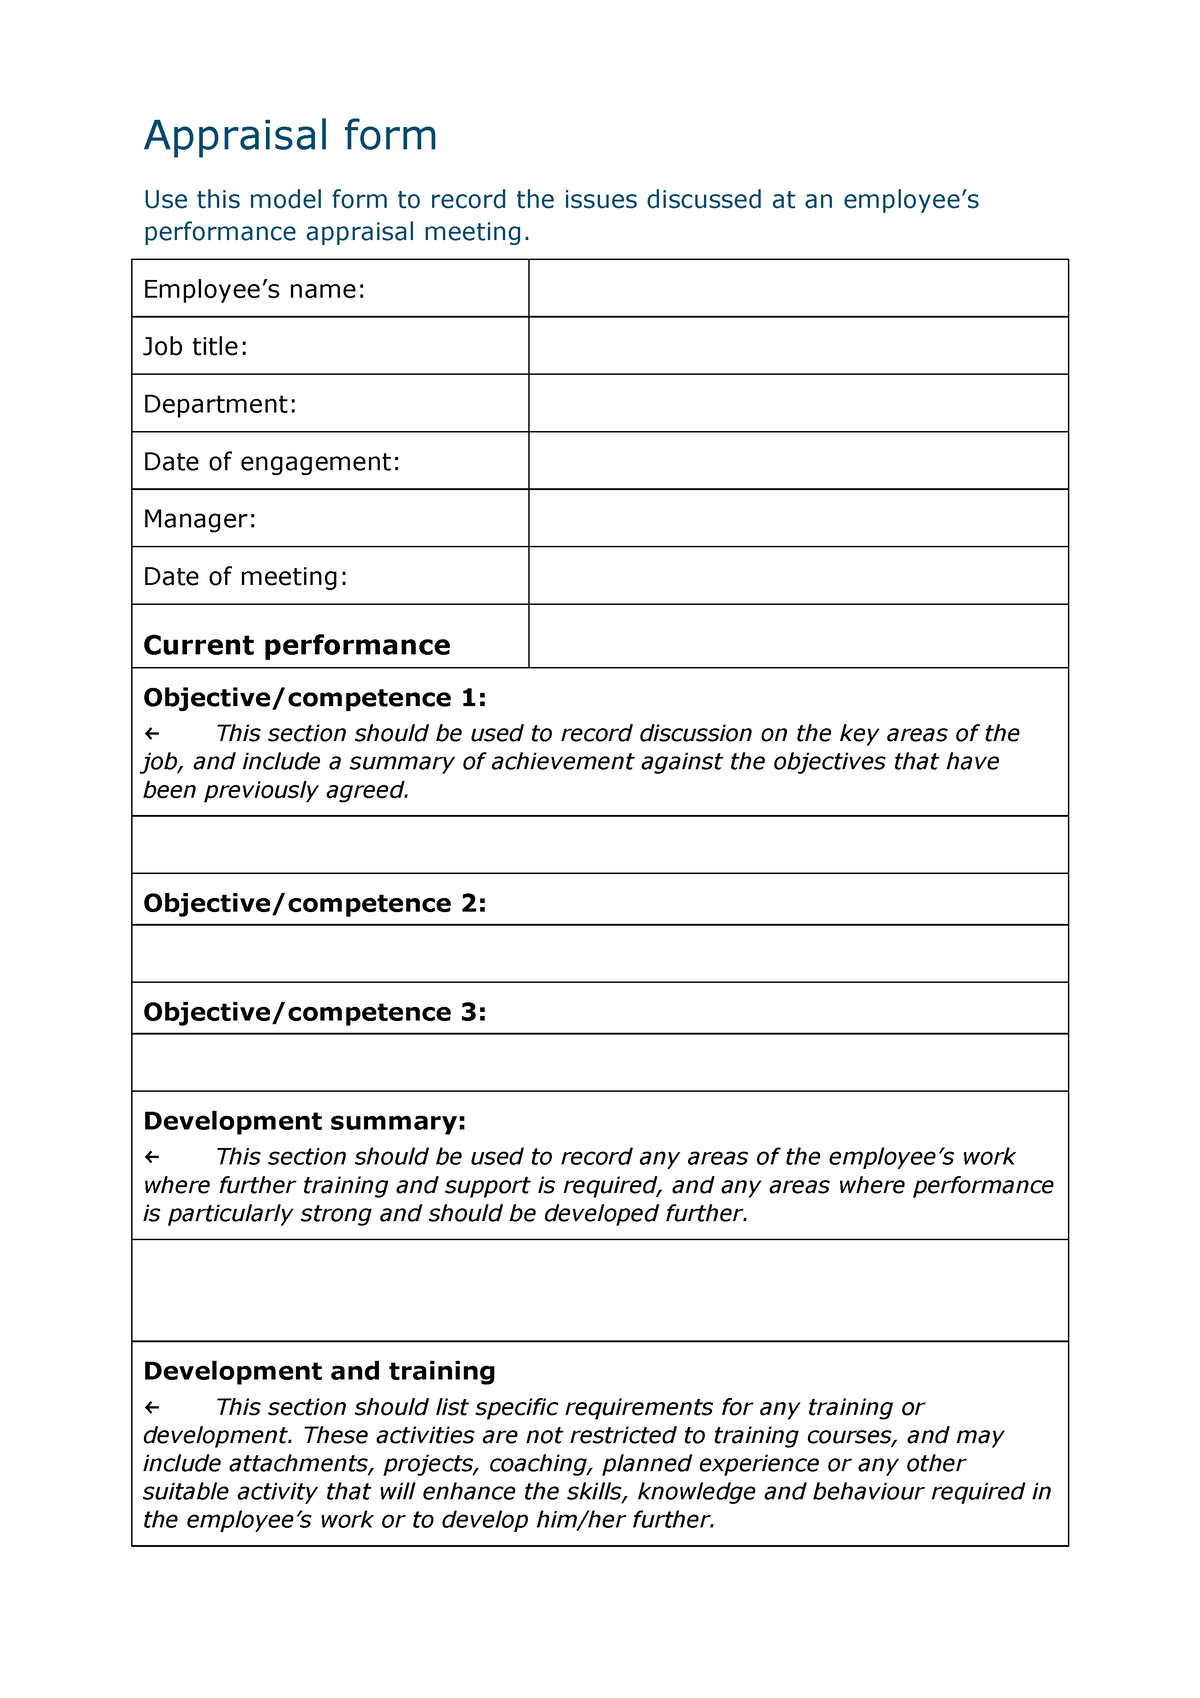 Appraisal form based on job objectives - Appraisal form Use this model ...